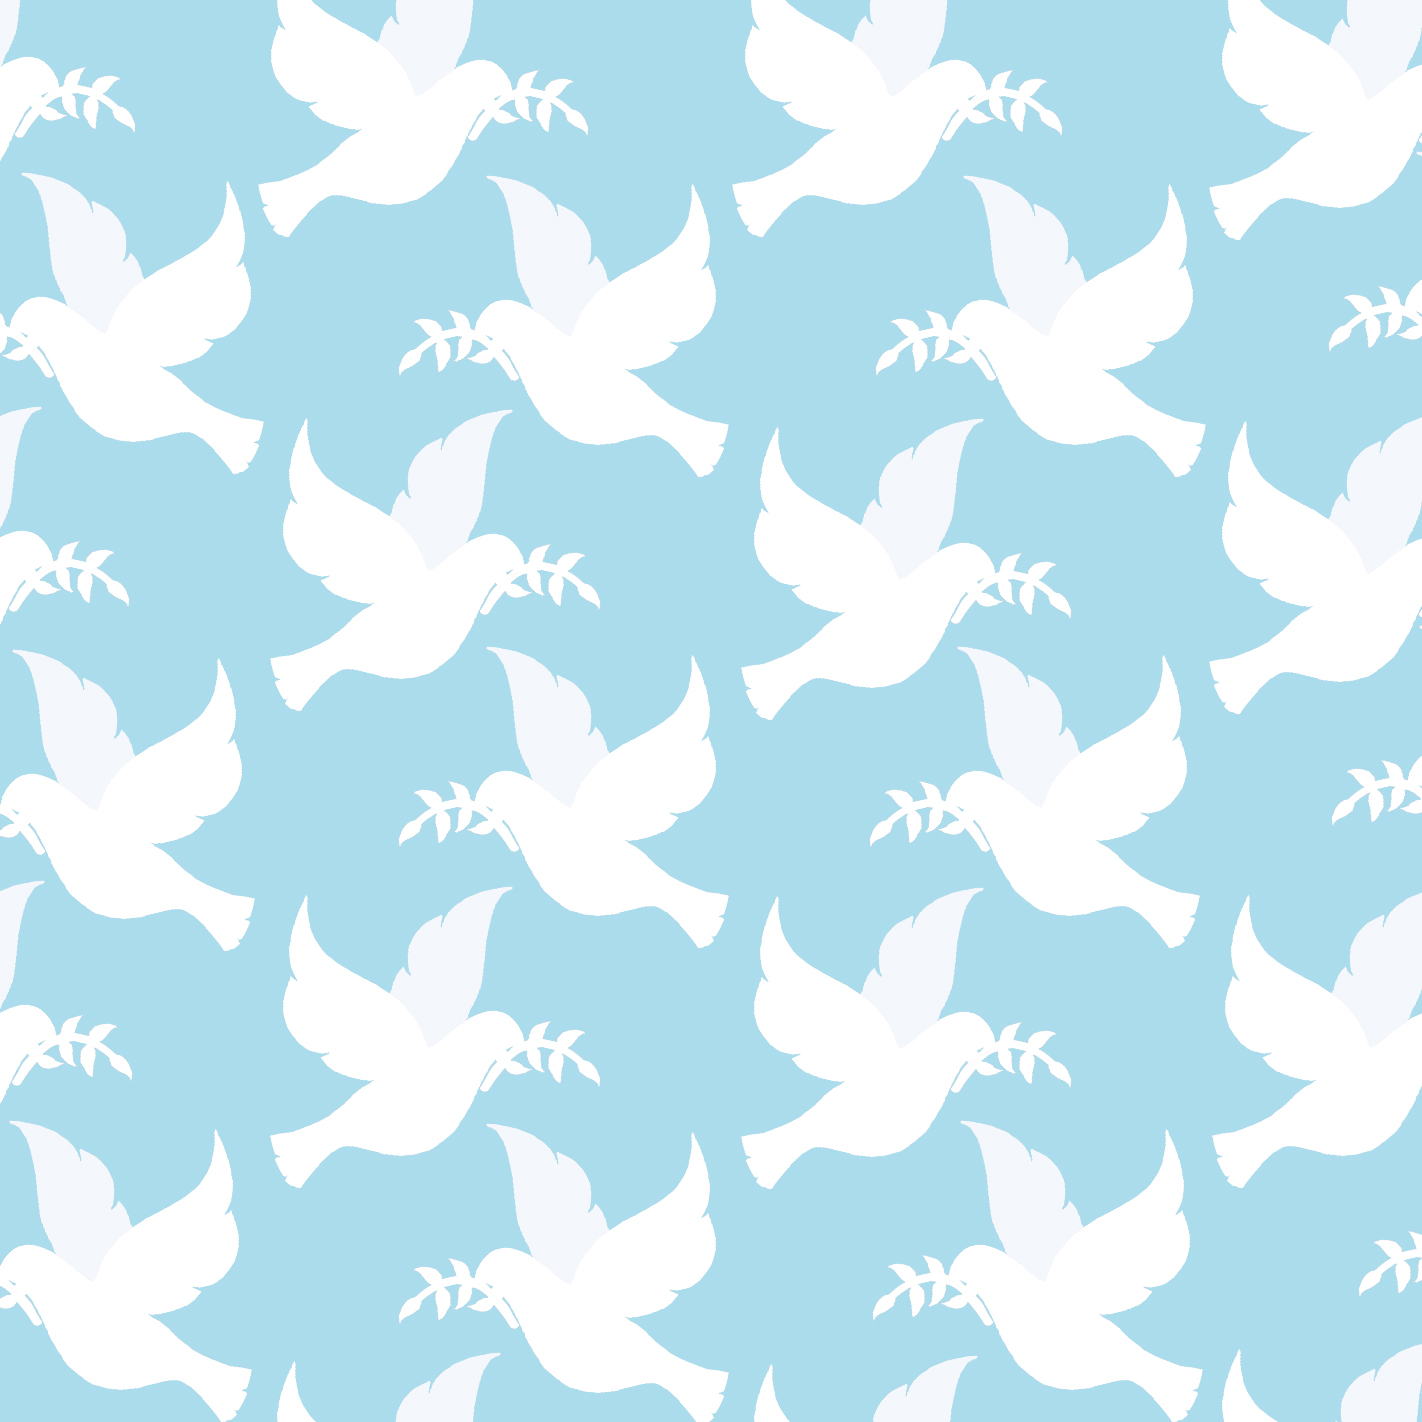 doves of peace